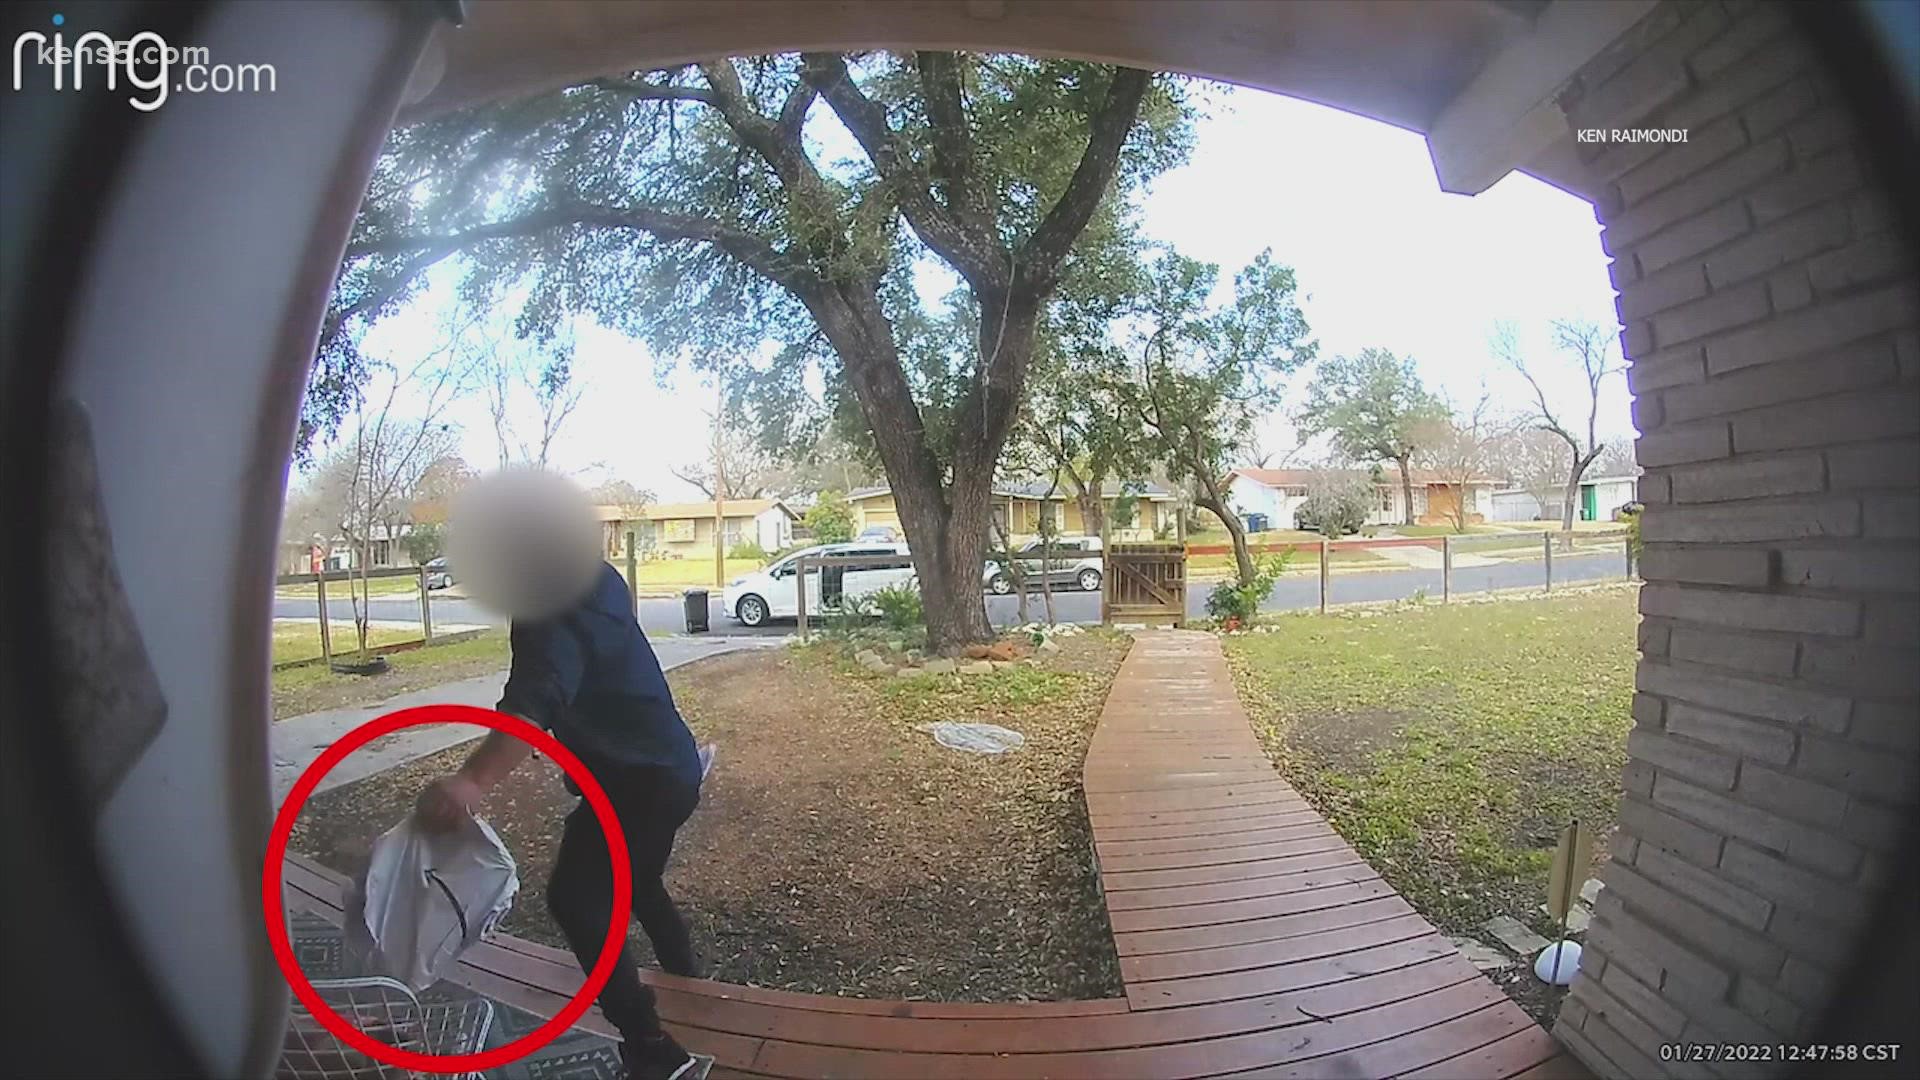 Doorbell videos show the two thieves checking mailboxes and taking packages from houses in the Ridgeview East neighborhood.